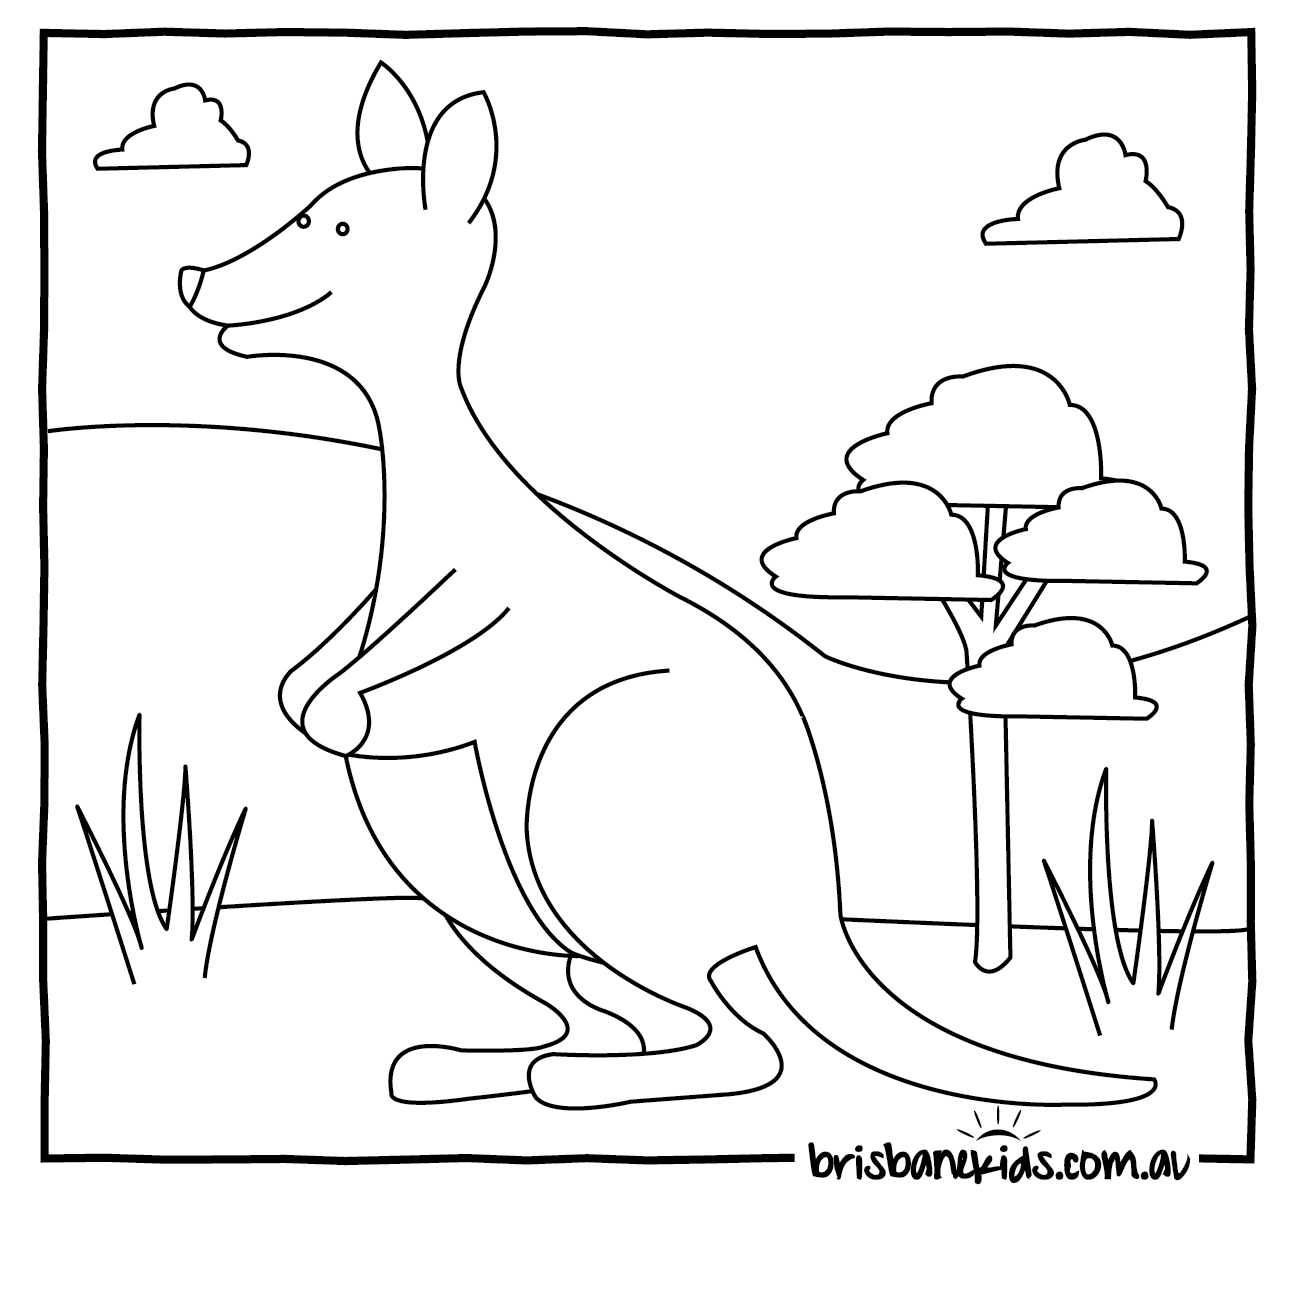 Australian Animals Colouring Pages | Brisbane Kids - Free Printable Pictures Of Australian Animals